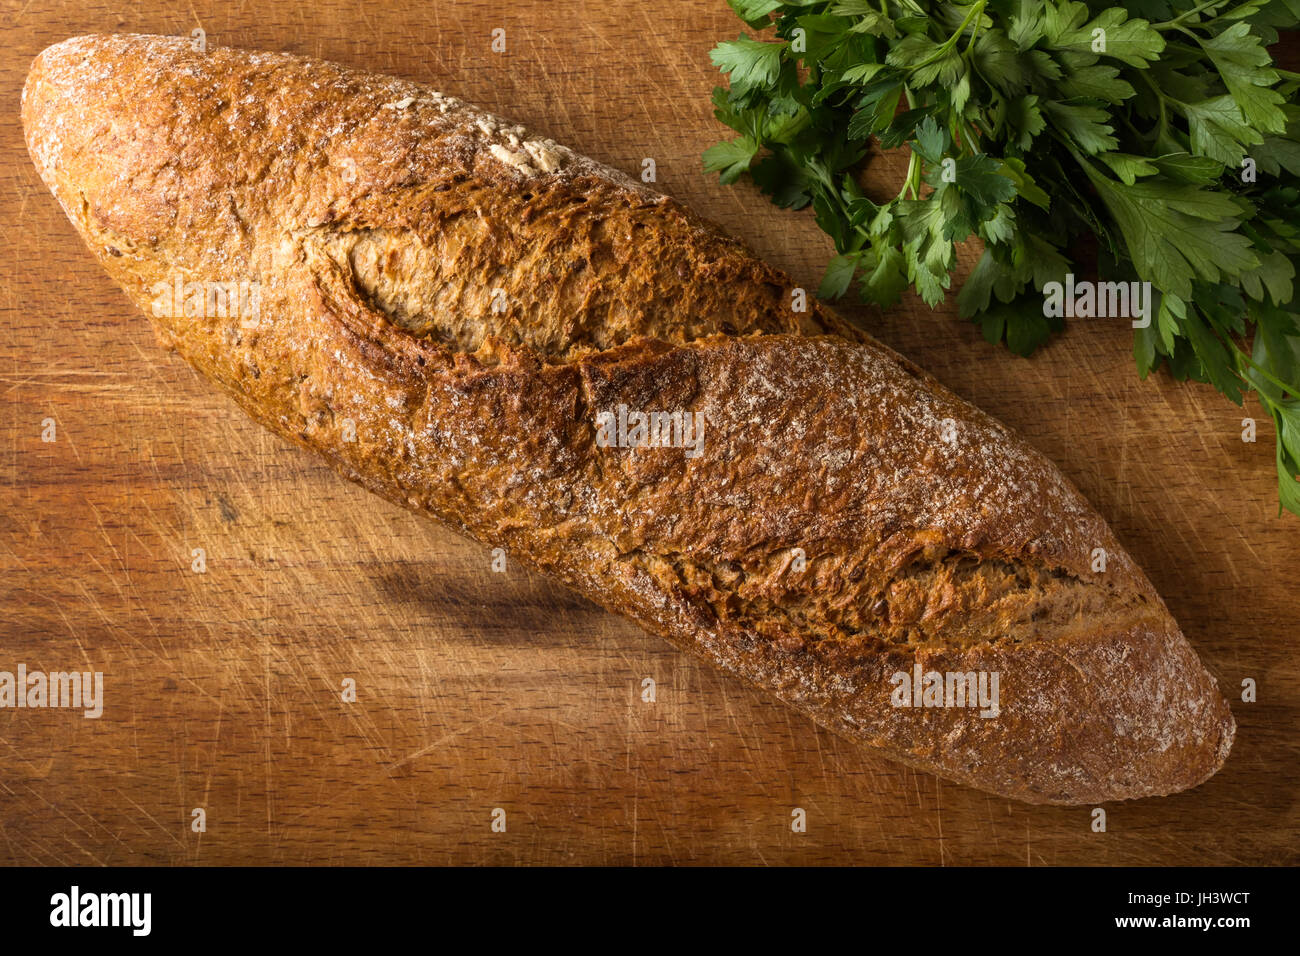 Freshly baked homemade bread on rustic dark wood background with bunch of parsley Stock Photo